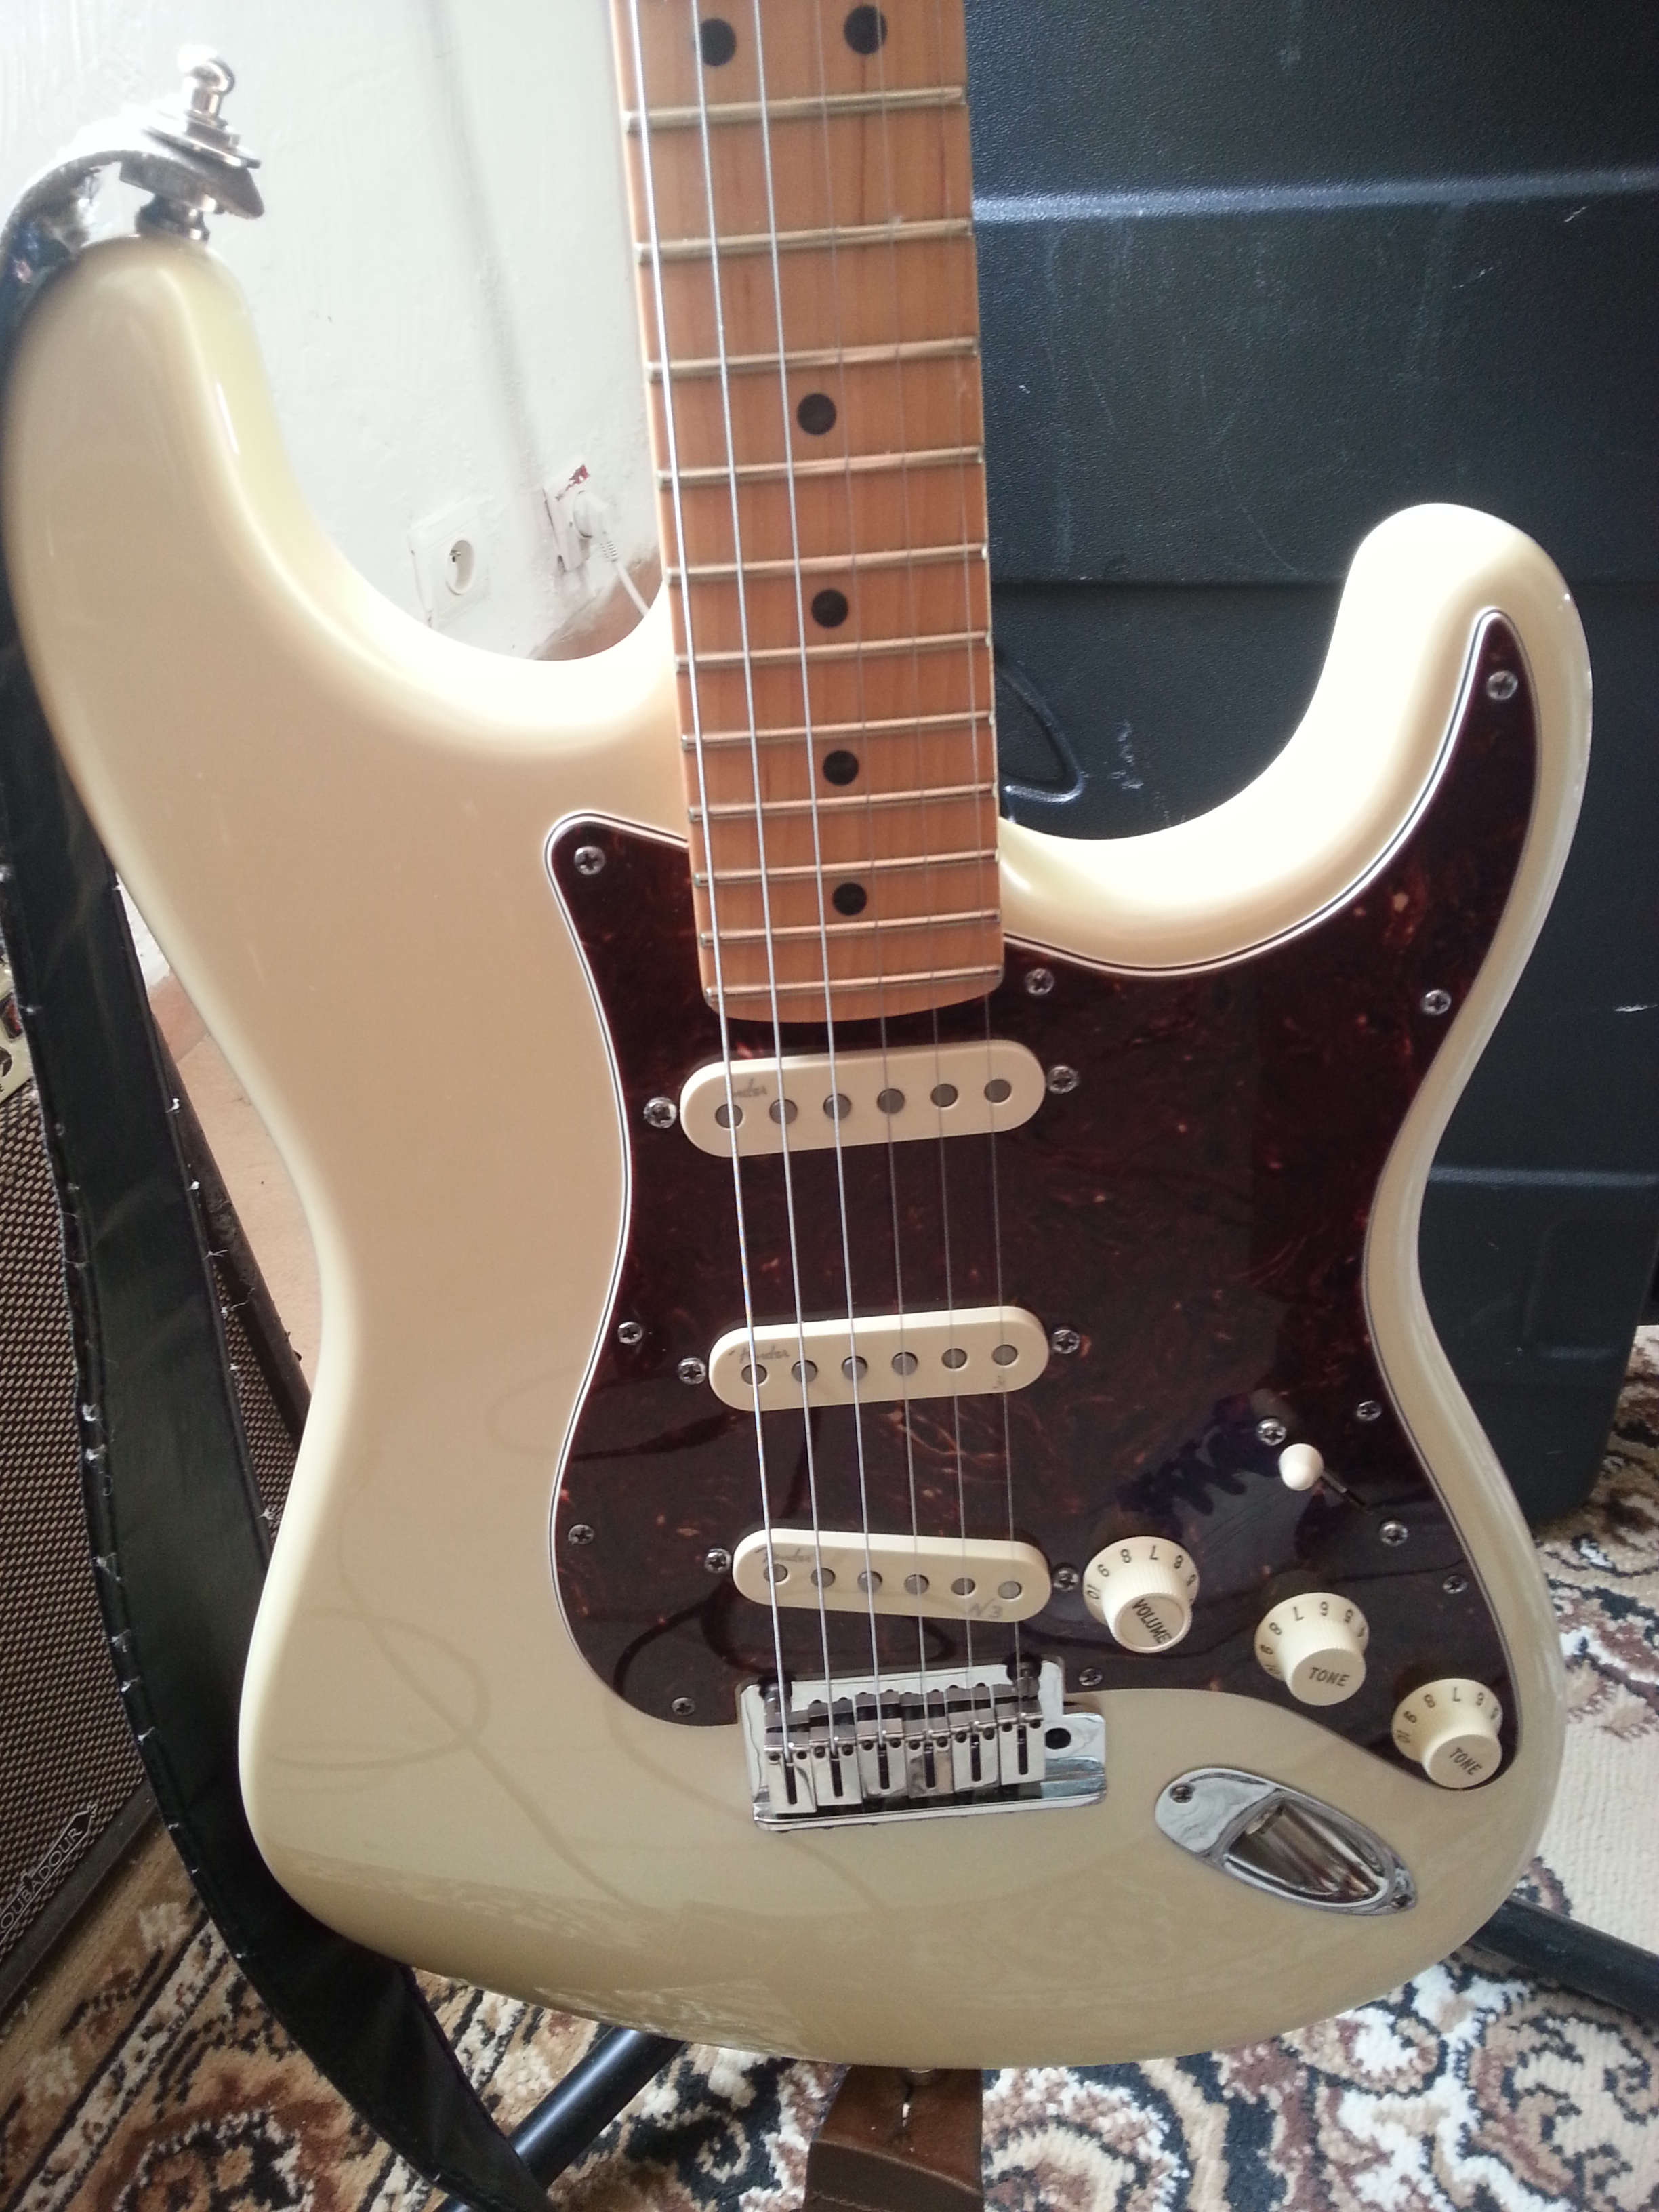 2010 Fender American Deluxe Stratocaster Hss Review